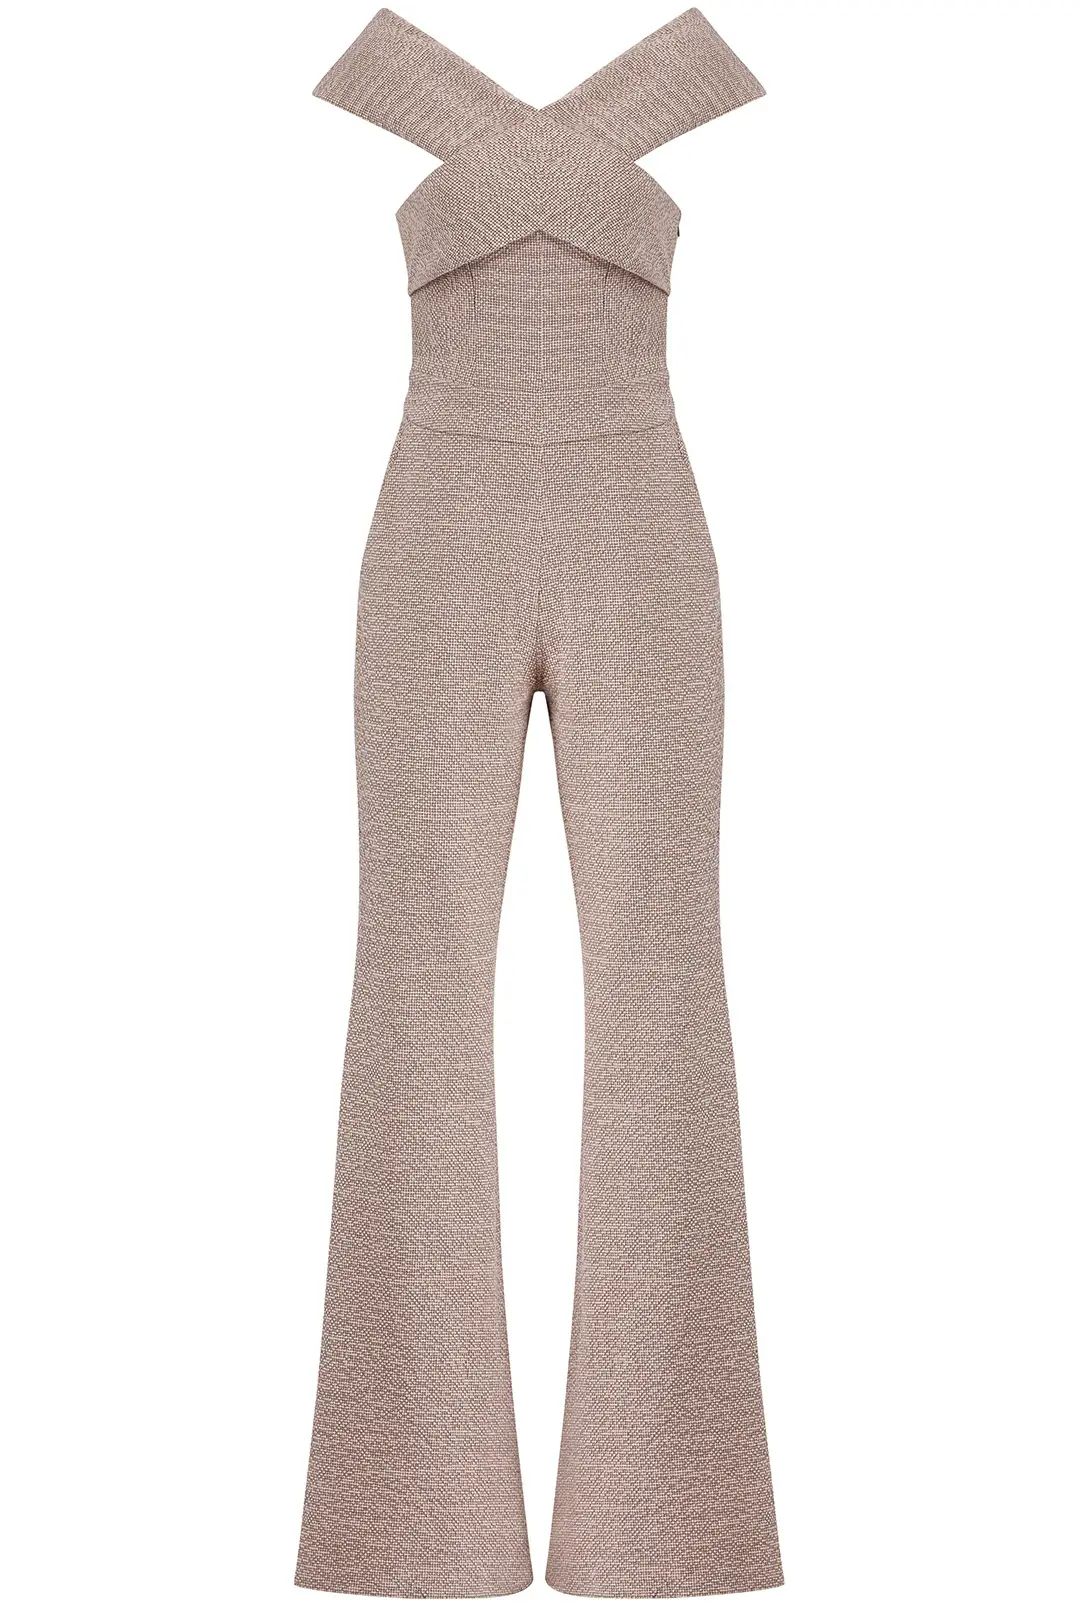 Wai Ming Pink Aria Jumpsuit | Rent the Runway